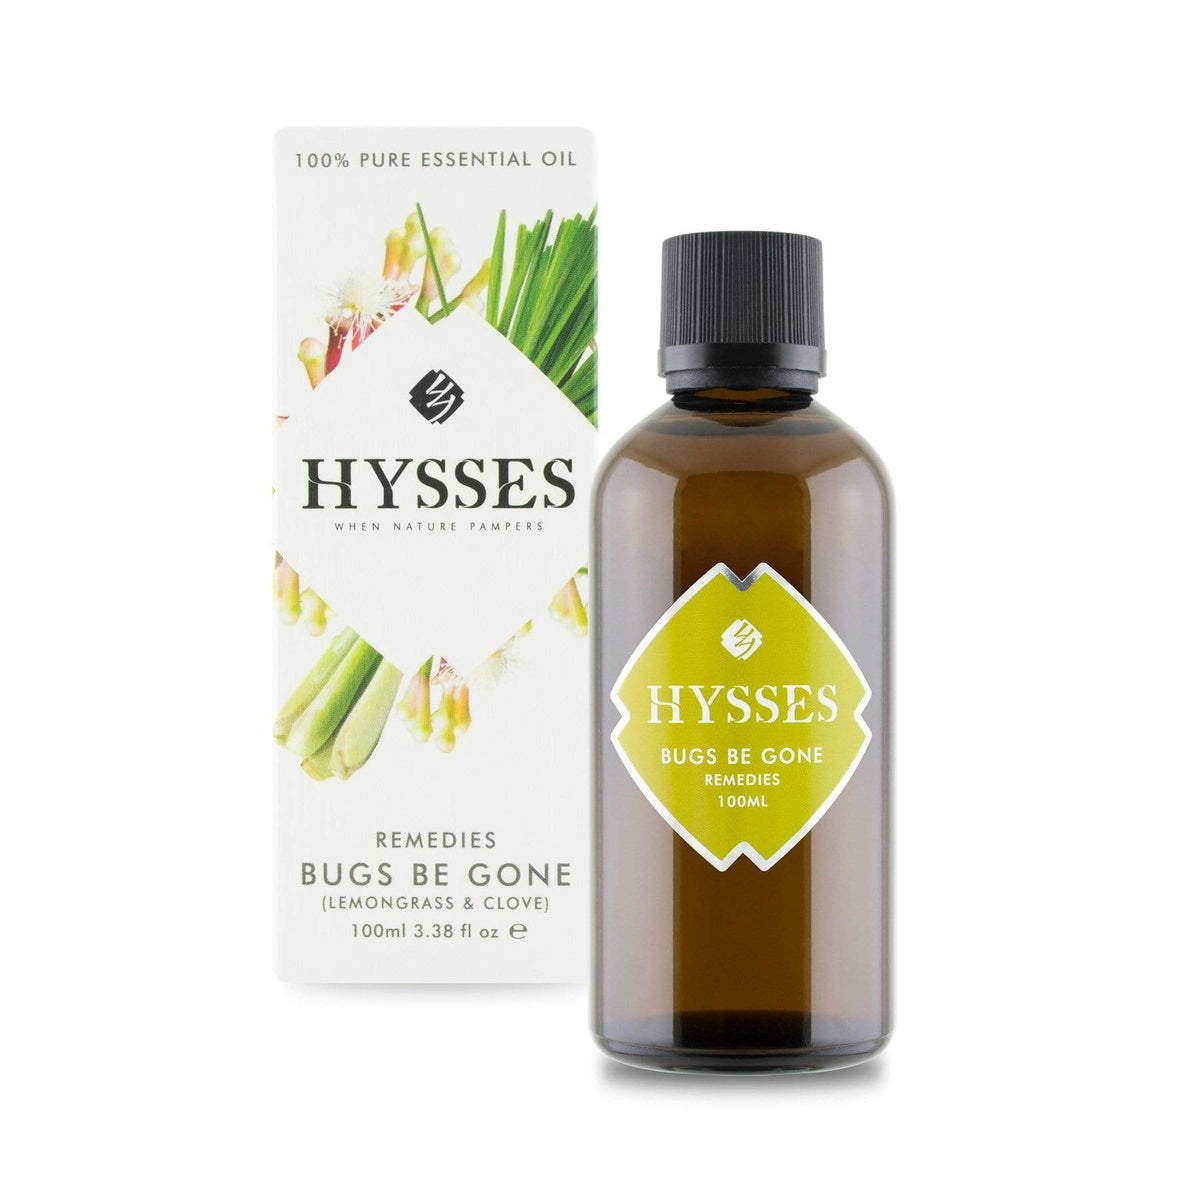 Hysses Essential Oil 100ml Remedies, Bugs Be Gone